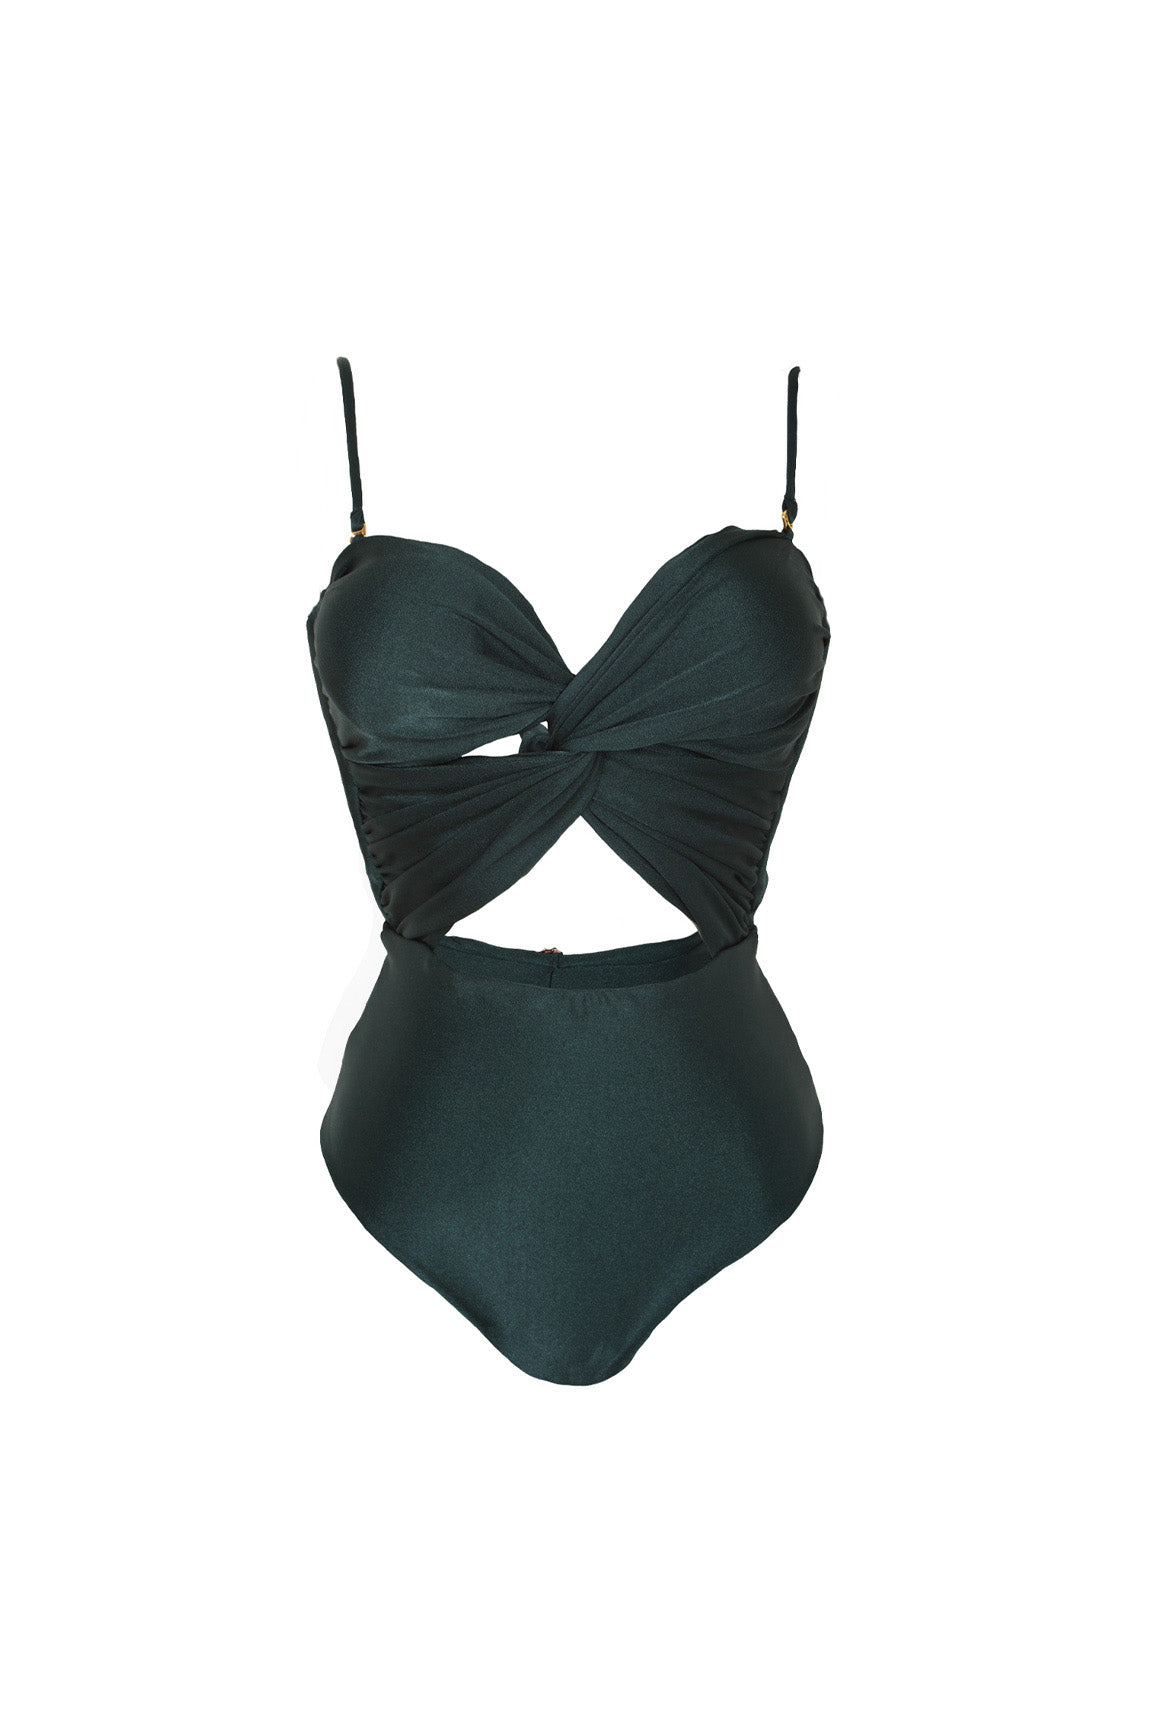 The Emerald Draped One Piece